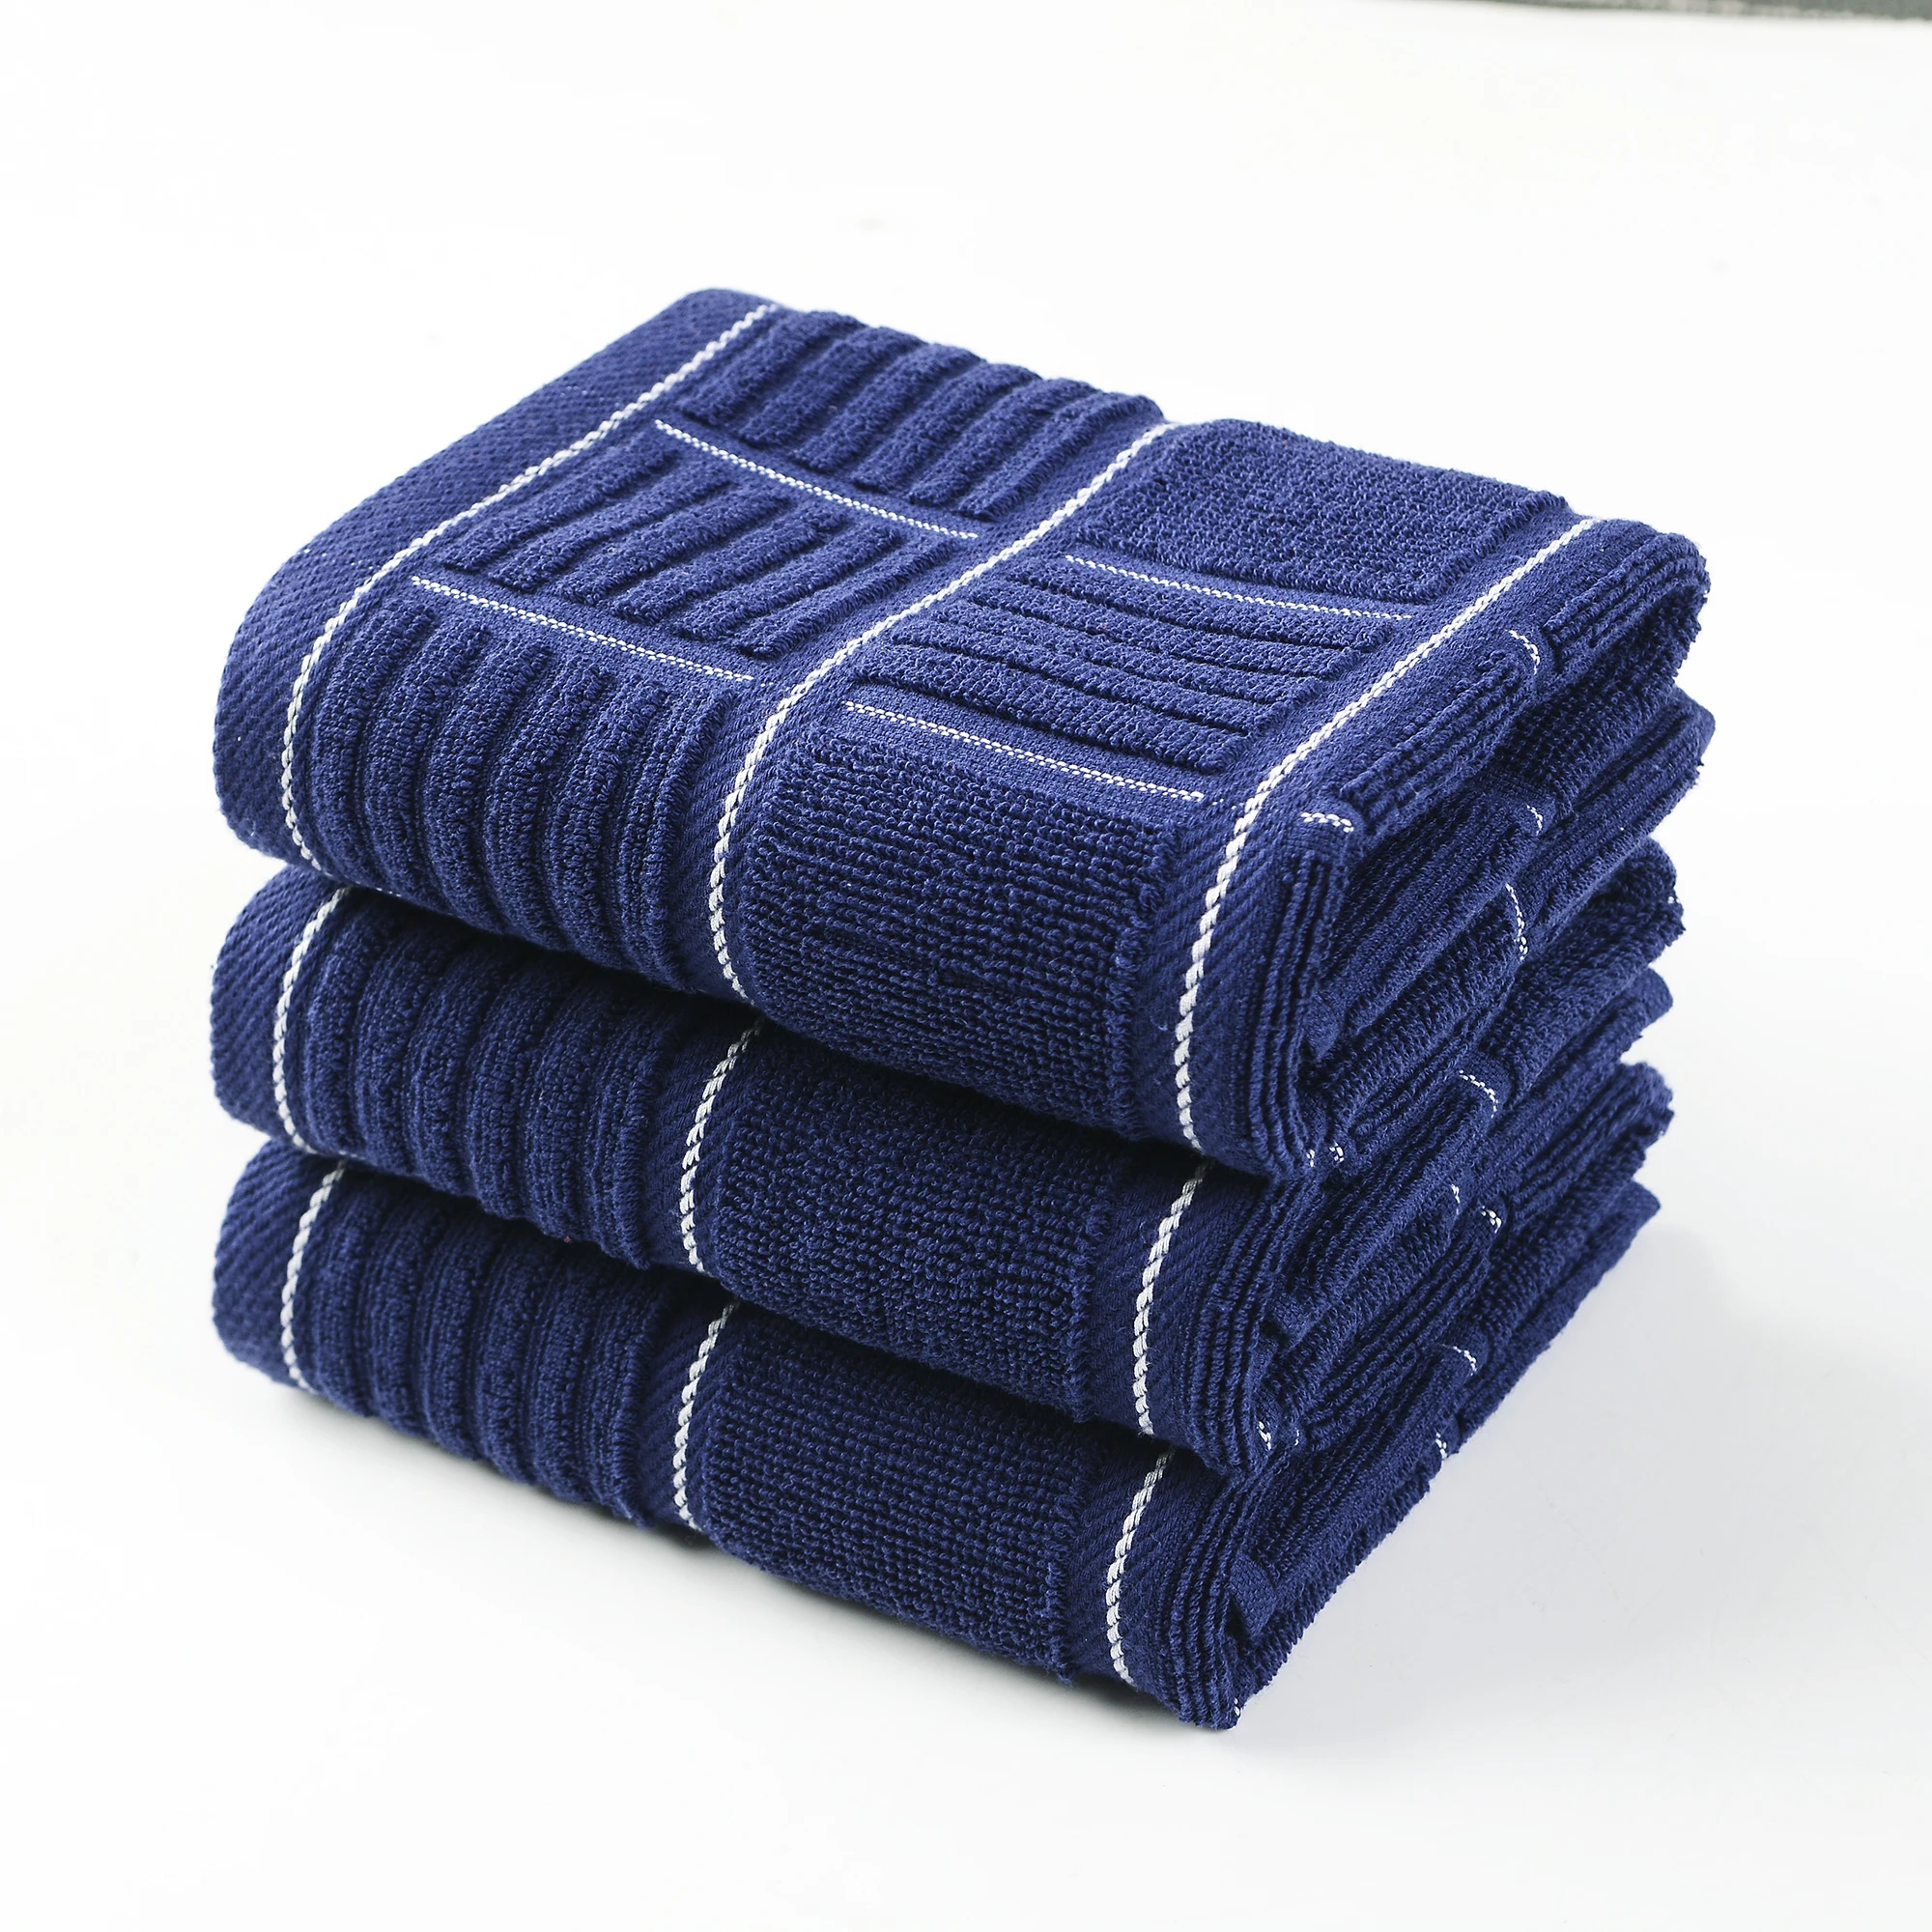 Oeleky Kitchen Towels Cotton With High Absorbent, Thick Dish Towels 16x26  Inches, Dishcloths 3 Colors Pack Of 3 - Buy Oeleky Kitchen Towels Cotton  With High Absorbent, Thick Dish Towels 16x26 Inches